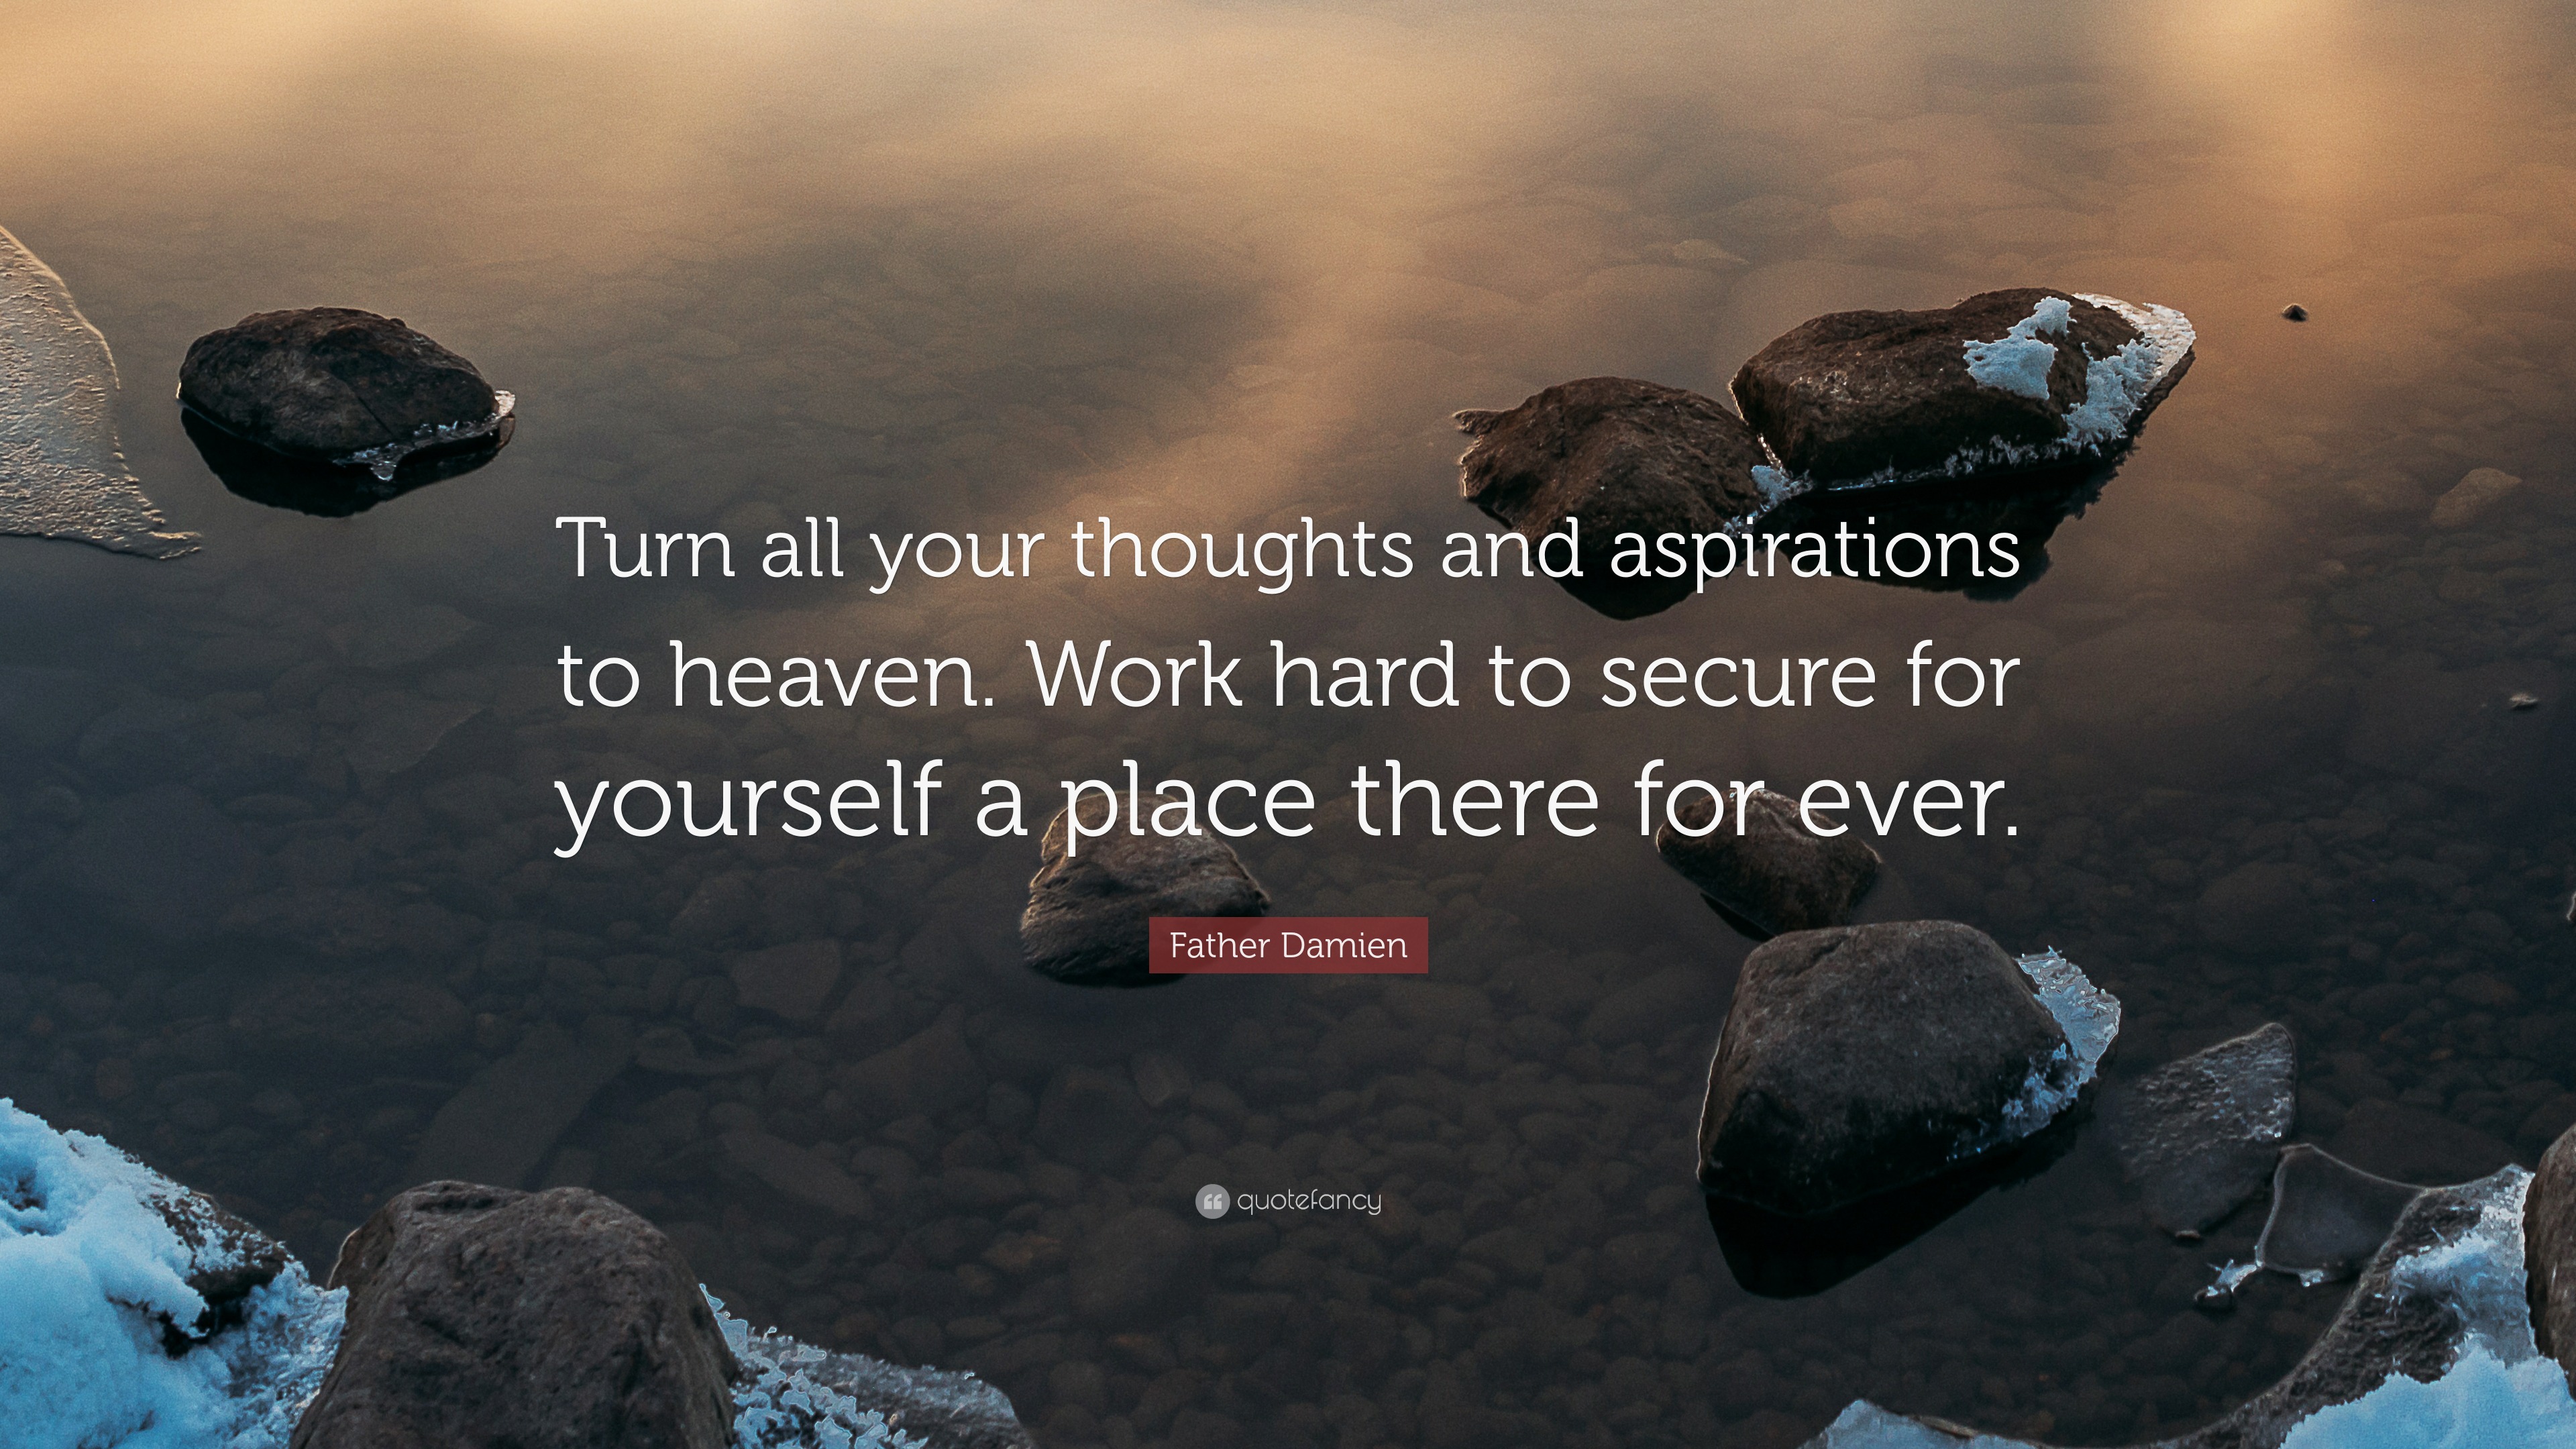 Father Damien Quote: “Turn all your thoughts and aspirations to heaven ...